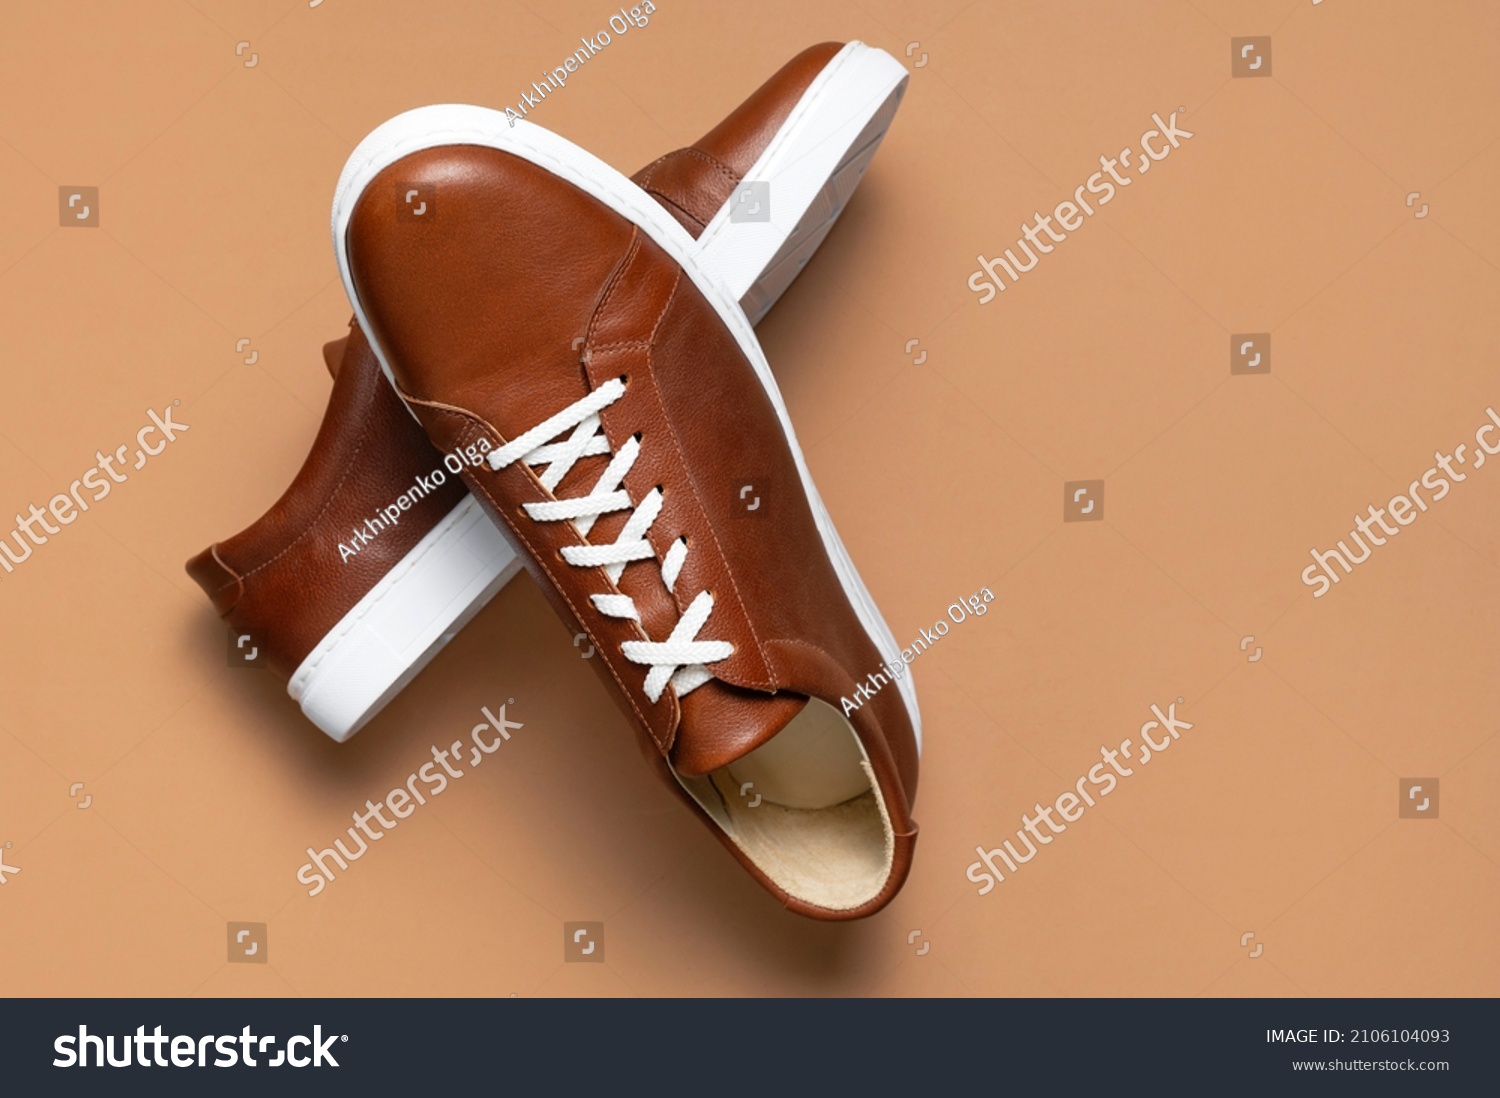 Leather brown men's sneakers with white laces and rubber soles on beige background. Flat lay top view. Men's sports casual shoes. Fashionable sneakers. Male fashion hipster footwear Minimal background #2106104093